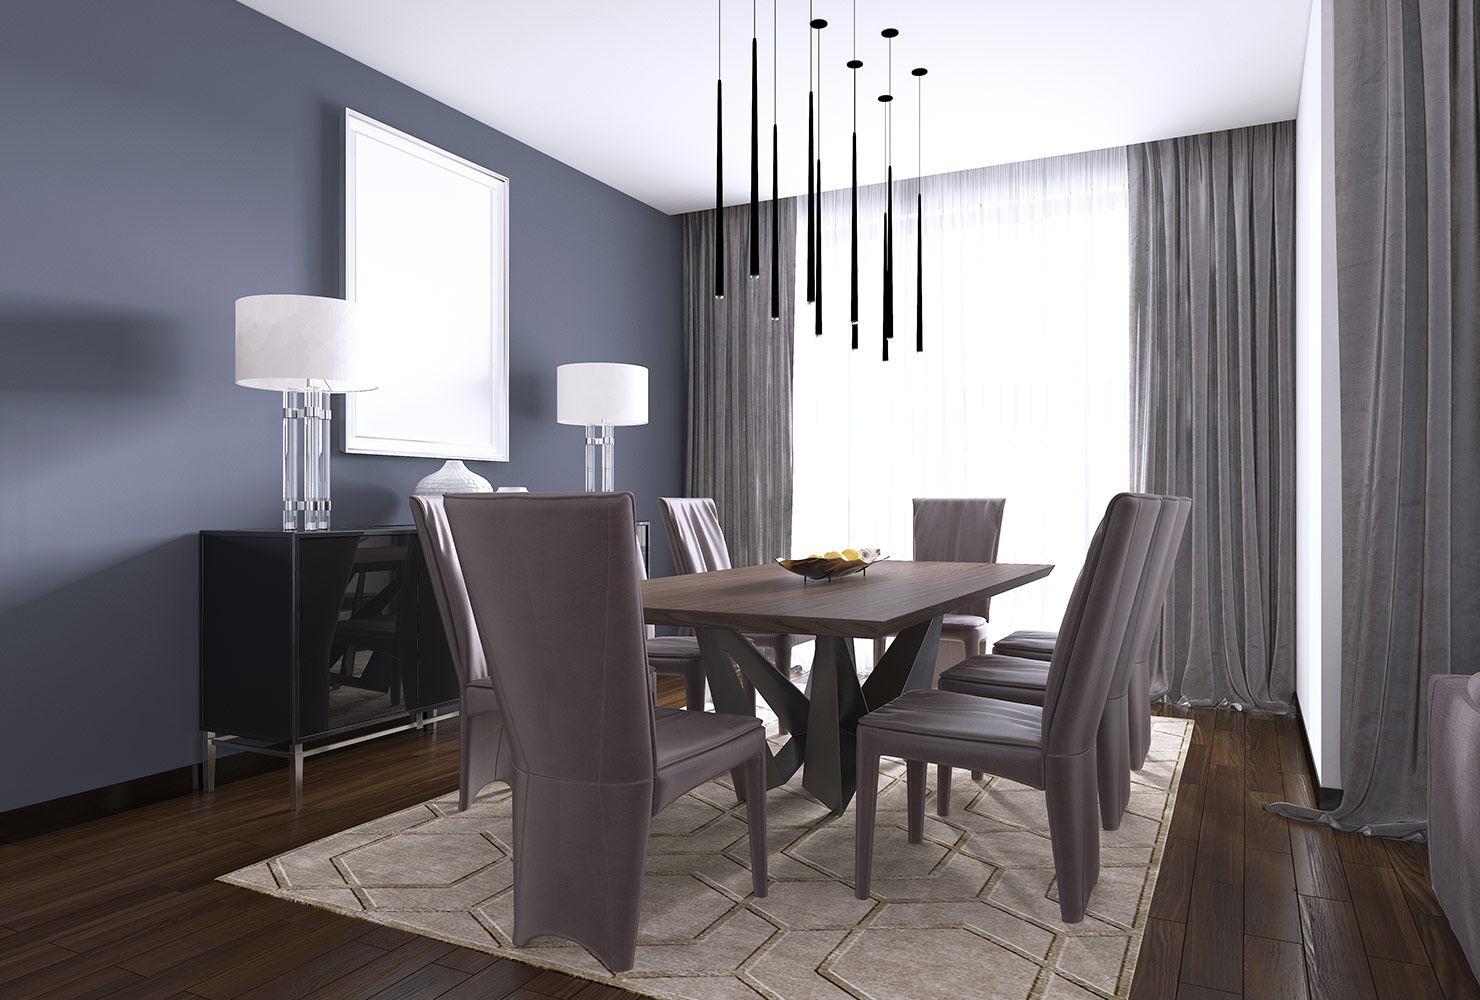 20 Trendy Dining Room Wall Colors to Transform Your Space | Shutterfly